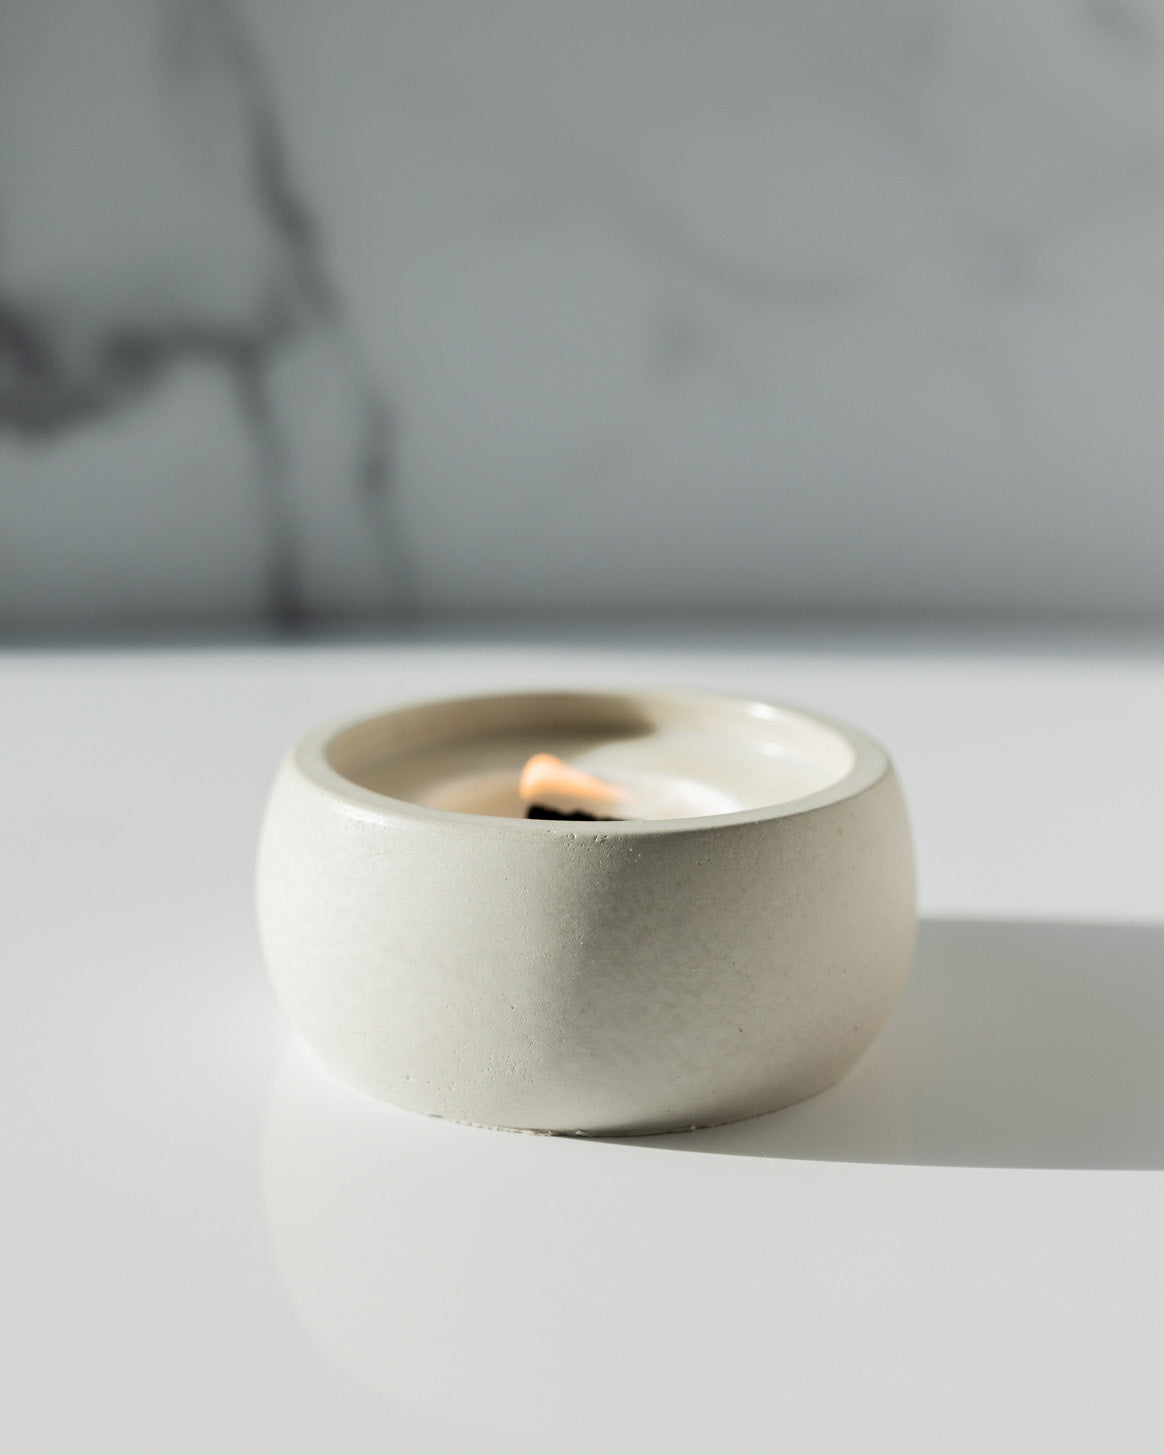 Fall Breeze Coconut Soy Candle - Concrete Wooden Wick Vessel